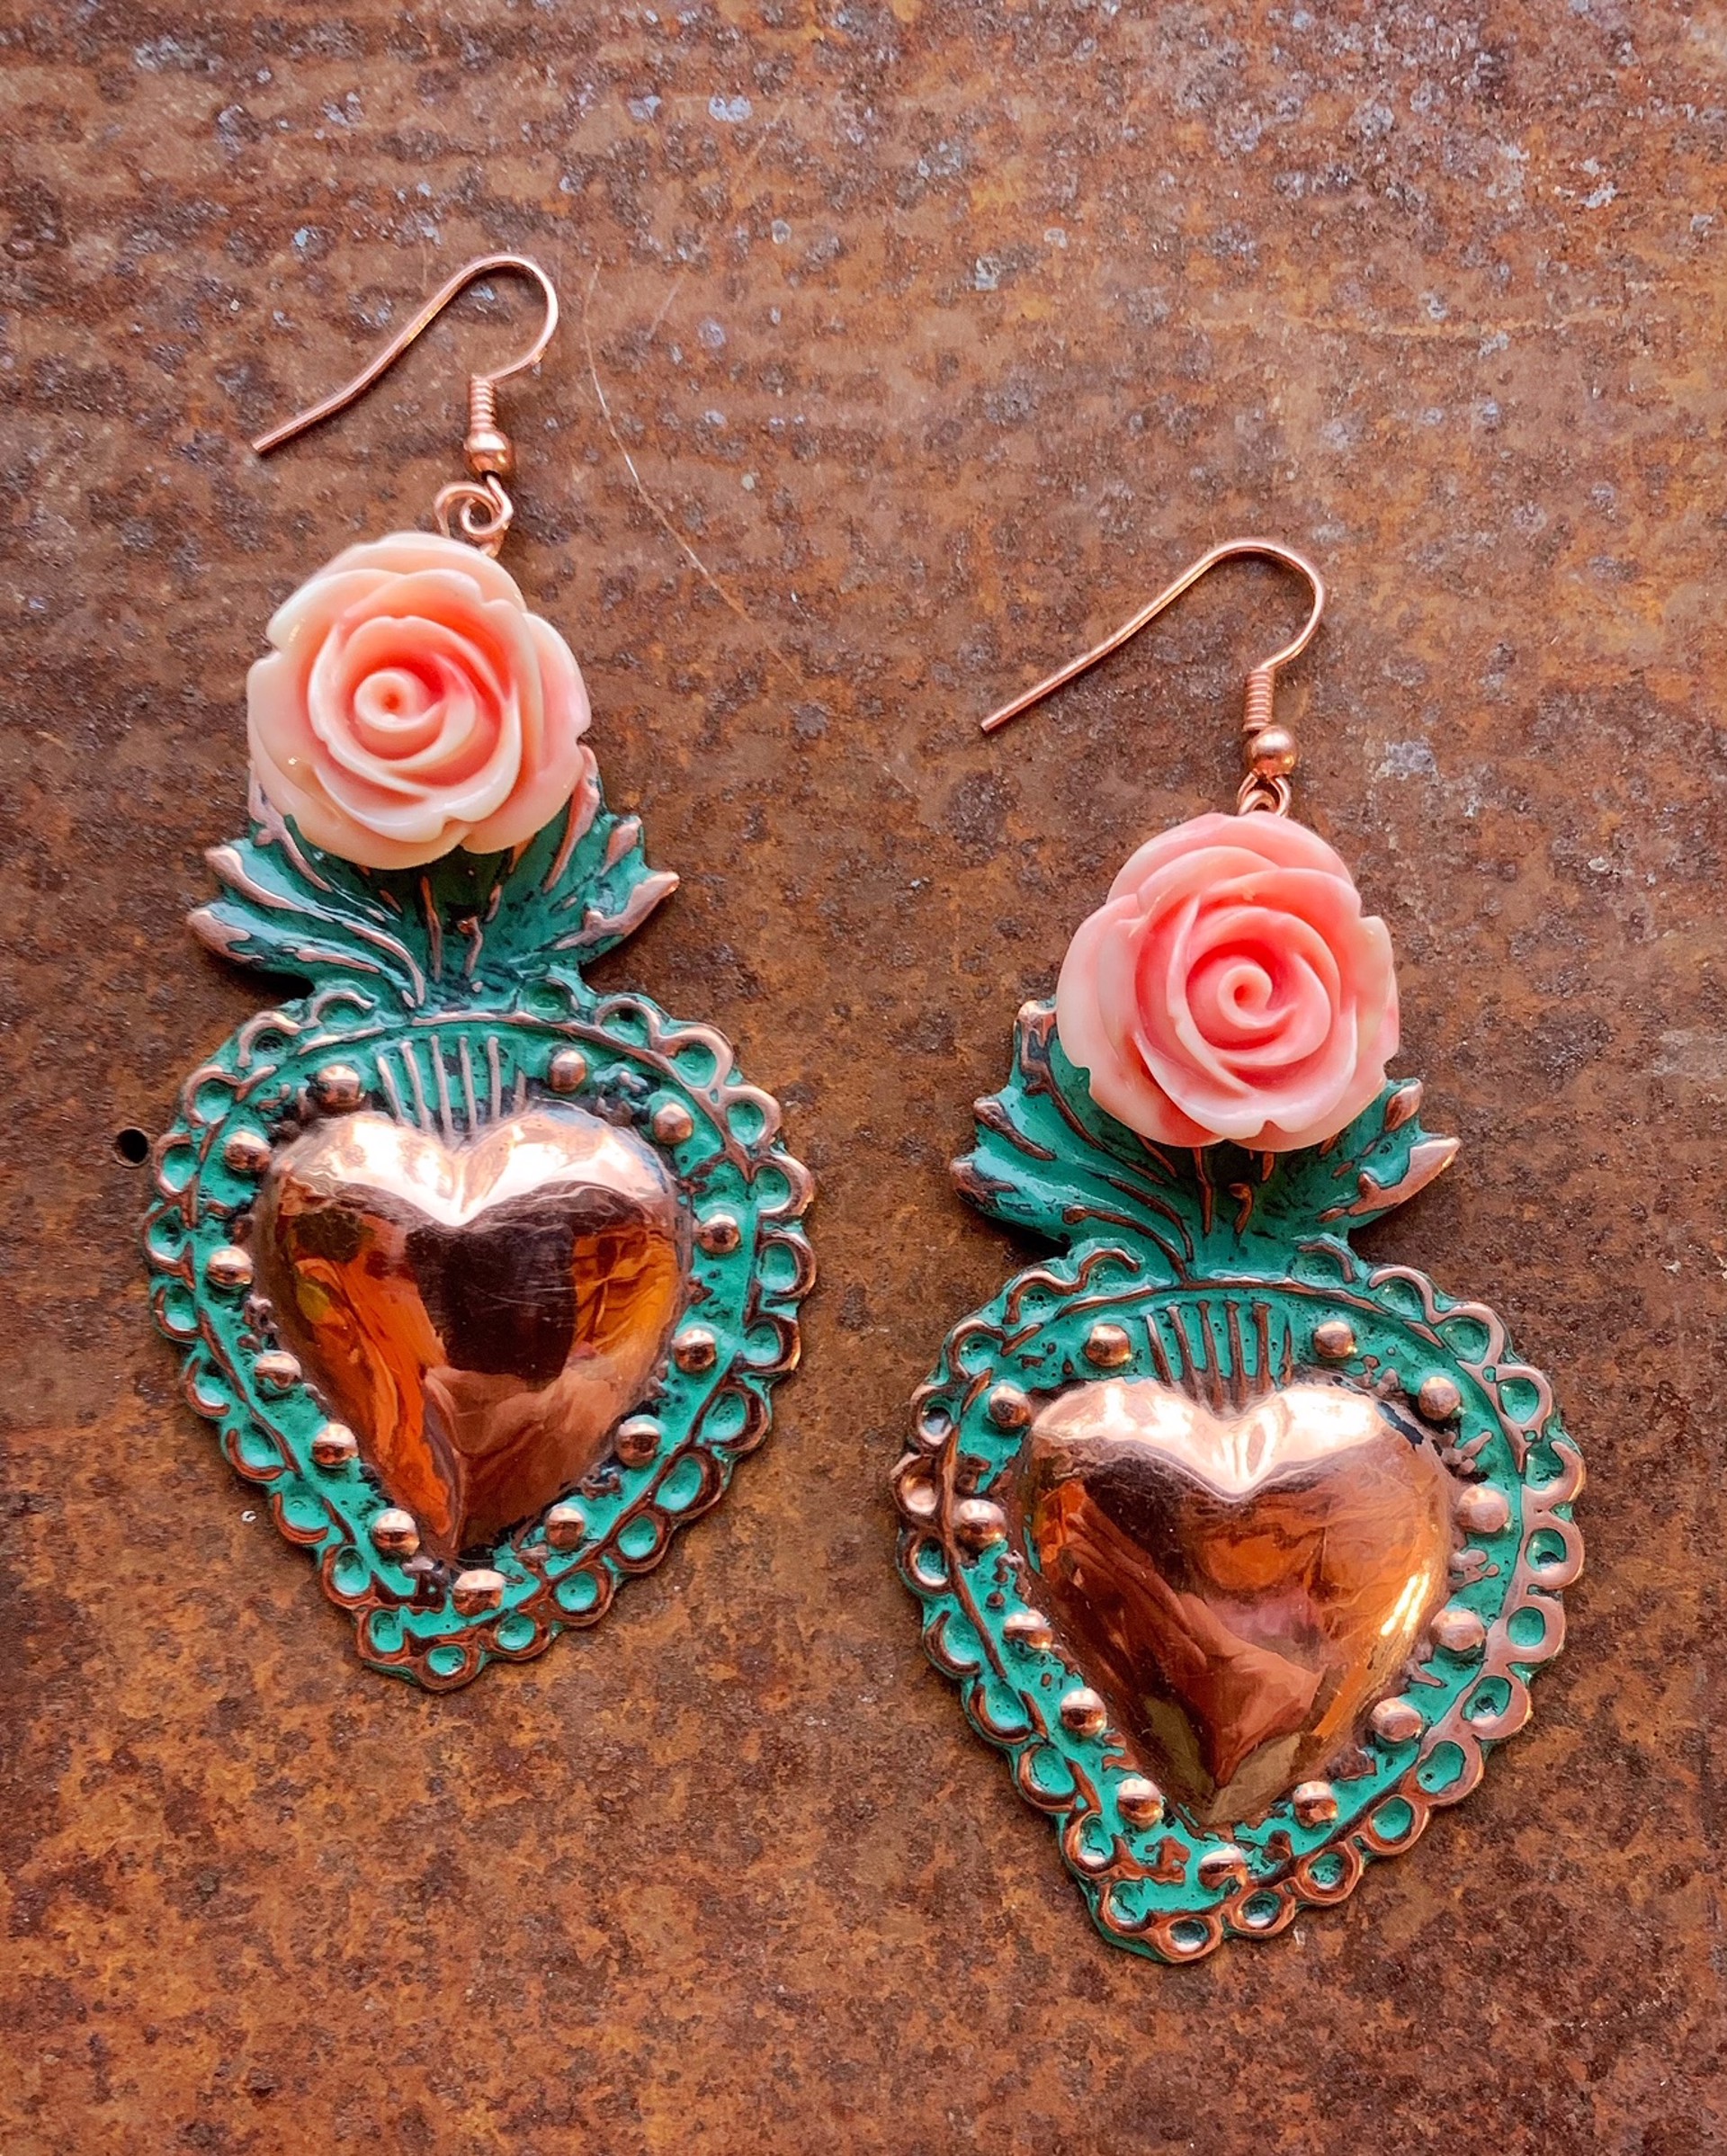 K794 Sacred Hearts with Pink Roses by Kelly Ormsby